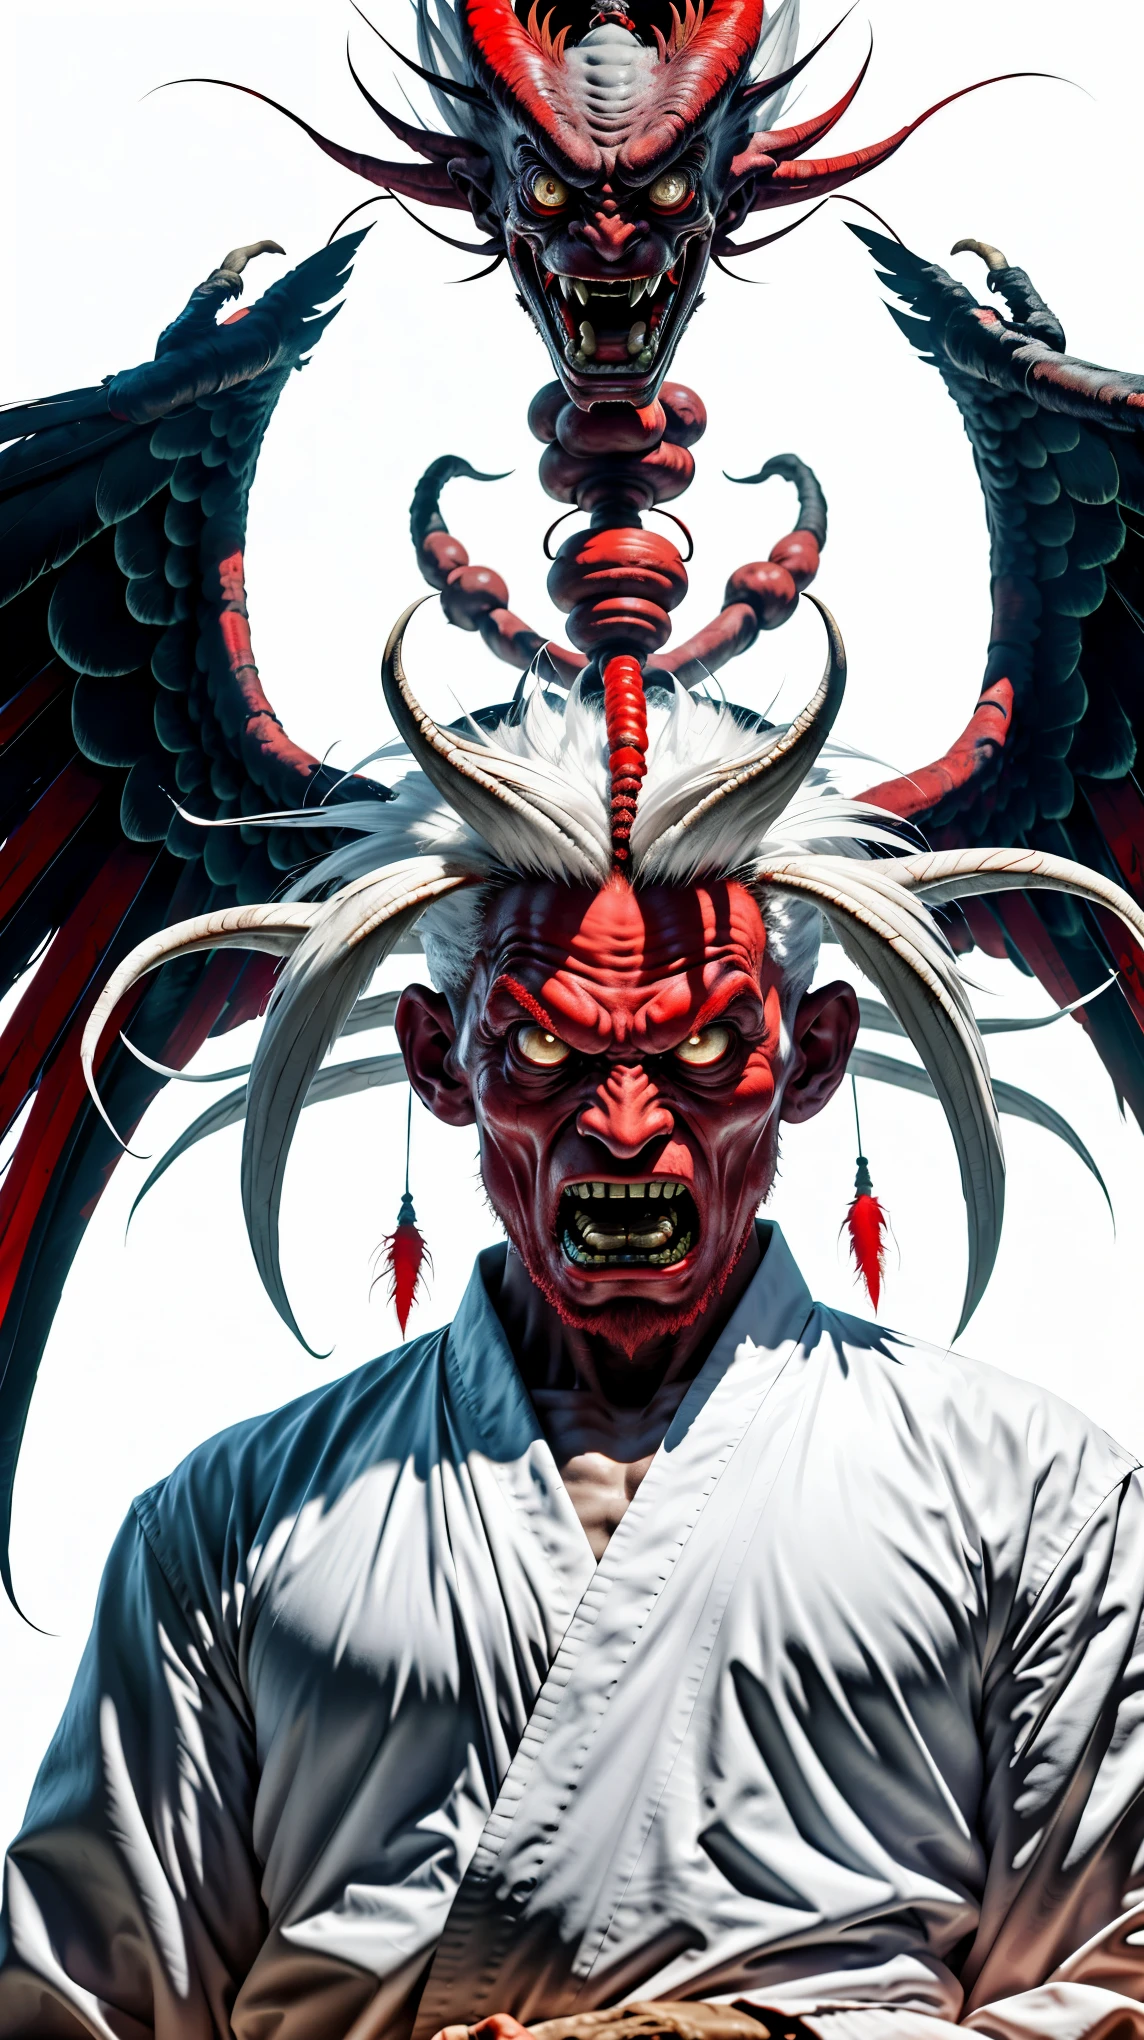 Imposing and terrifying alien tengu, it is 3 meters tall, has red-hot skin, long white hair, angelic white feather wings, and is adorned with a Buddhist monk's outfit, volatile, aggressive and ruthless.